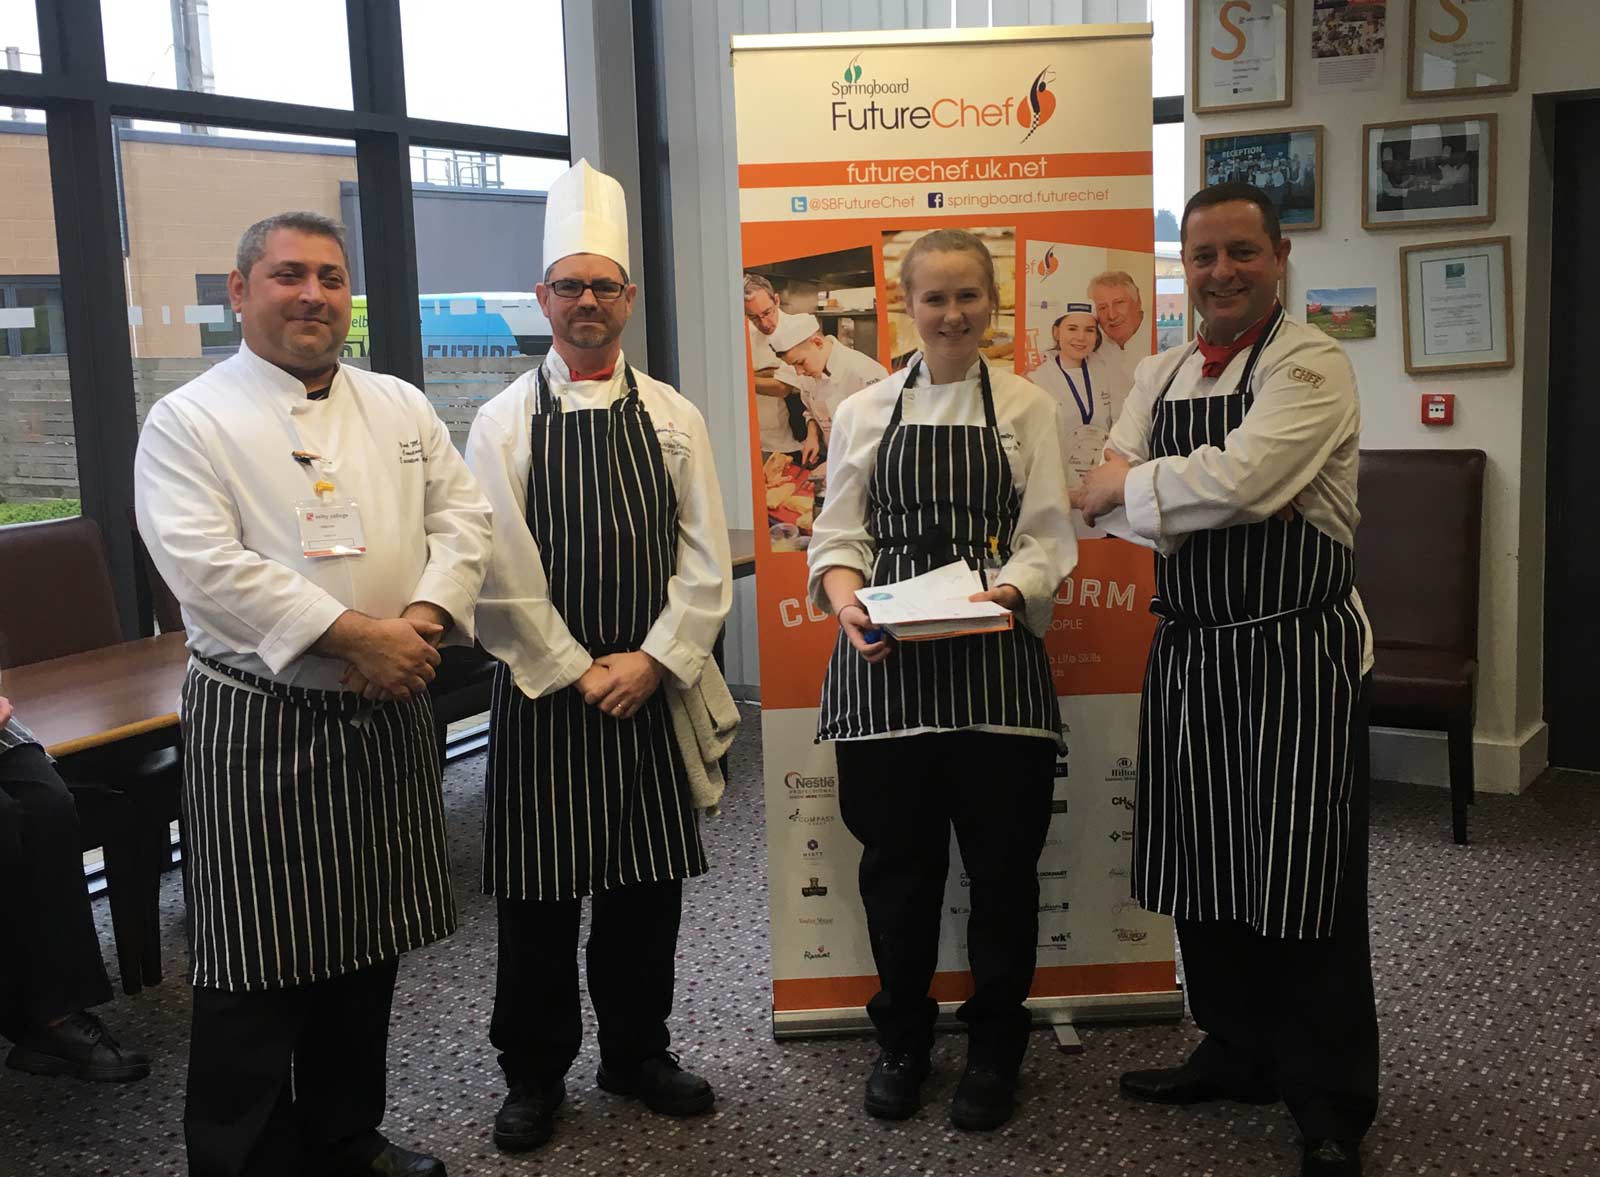 Fourteen year old Alice Young of Rossett School cooked up a storm to reach Springboard’s FutureChef Regional Final.